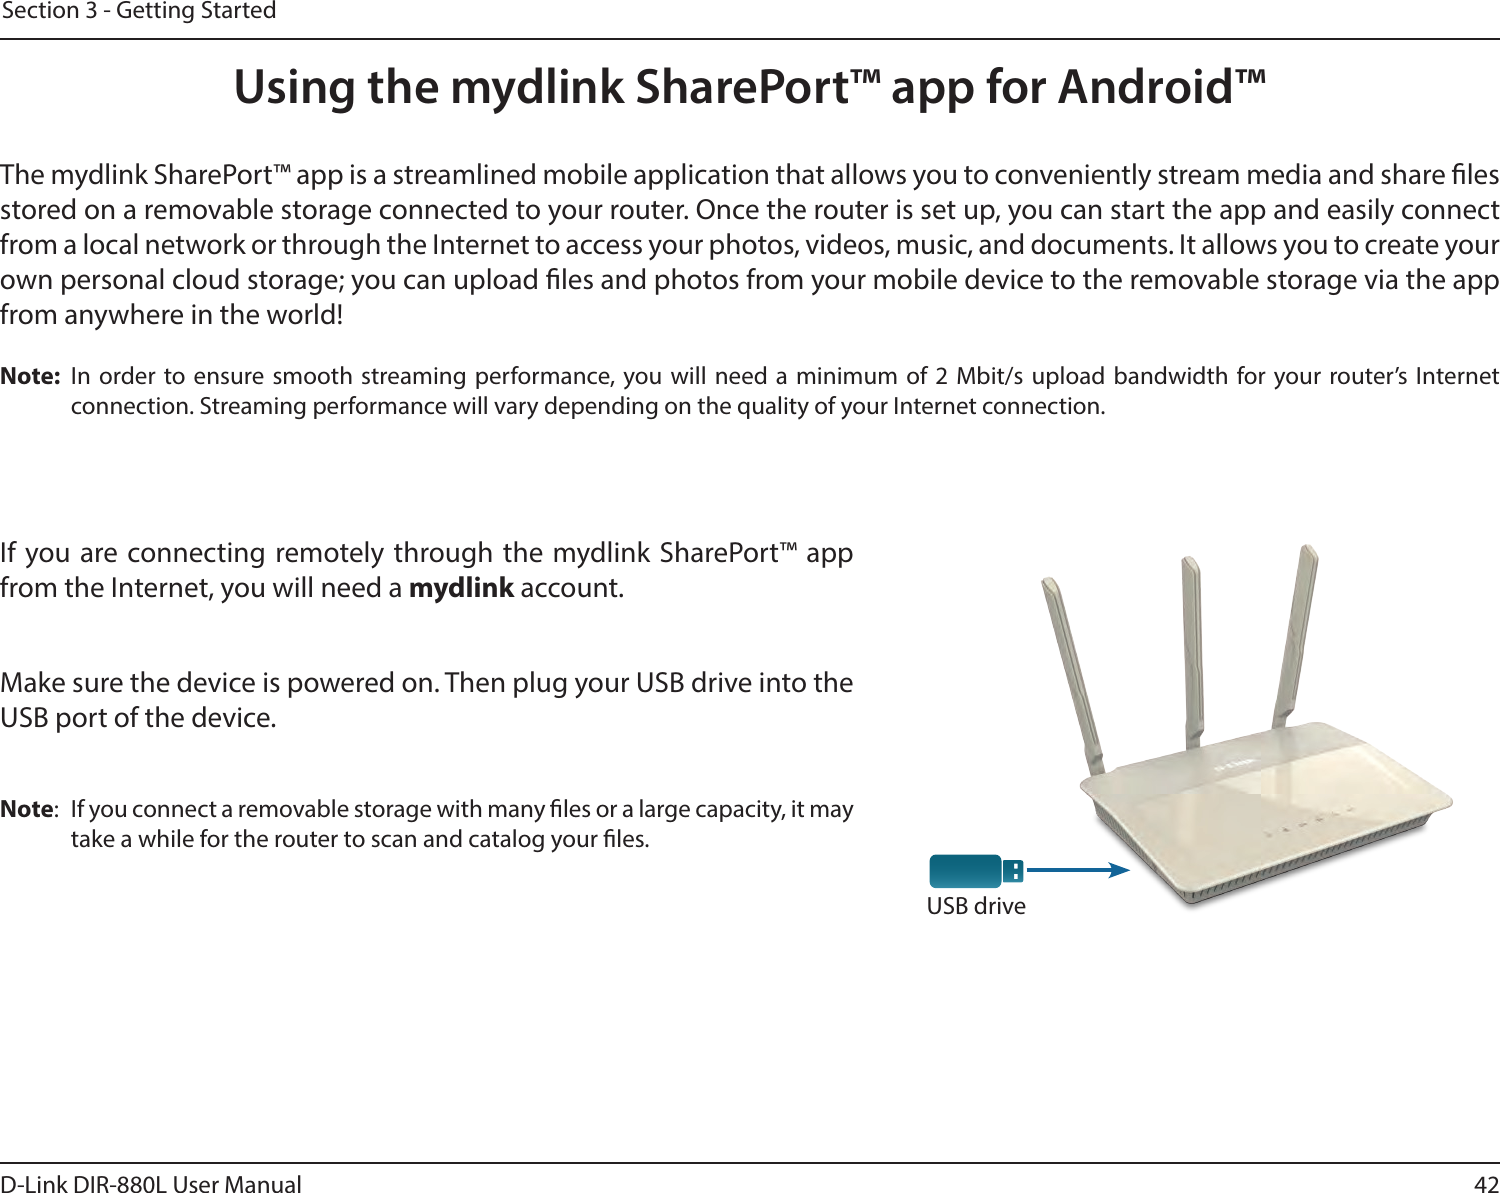 42D-Link DIR-880L User ManualSection 3 - Getting StartedUsing the mydlink SharePort™ app for Android™The mydlink SharePort™ app is a streamlined mobile application that allows you to conveniently stream media and share les stored on a removable storage connected to your router. Once the router is set up, you can start the app and easily connect from a local network or through the Internet to access your photos, videos, music, and documents. It allows you to create your own personal cloud storage; you can upload les and photos from your mobile device to the removable storage via the app from anywhere in the world!Note:  In order to ensure smooth streaming performance, you will need a minimum of 2 Mbit/s upload bandwidth for your router’s Internet connection. Streaming performance will vary depending on the quality of your Internet connection.If you are connecting remotely through the mydlink SharePort™ app from the Internet, you will need a mydlink account. Make sure the device is powered on. Then plug your USB drive into the USB port of the device.Note:  If you connect a removable storage with many les or a large capacity, it may take a while for the router to scan and catalog your les.USB drive